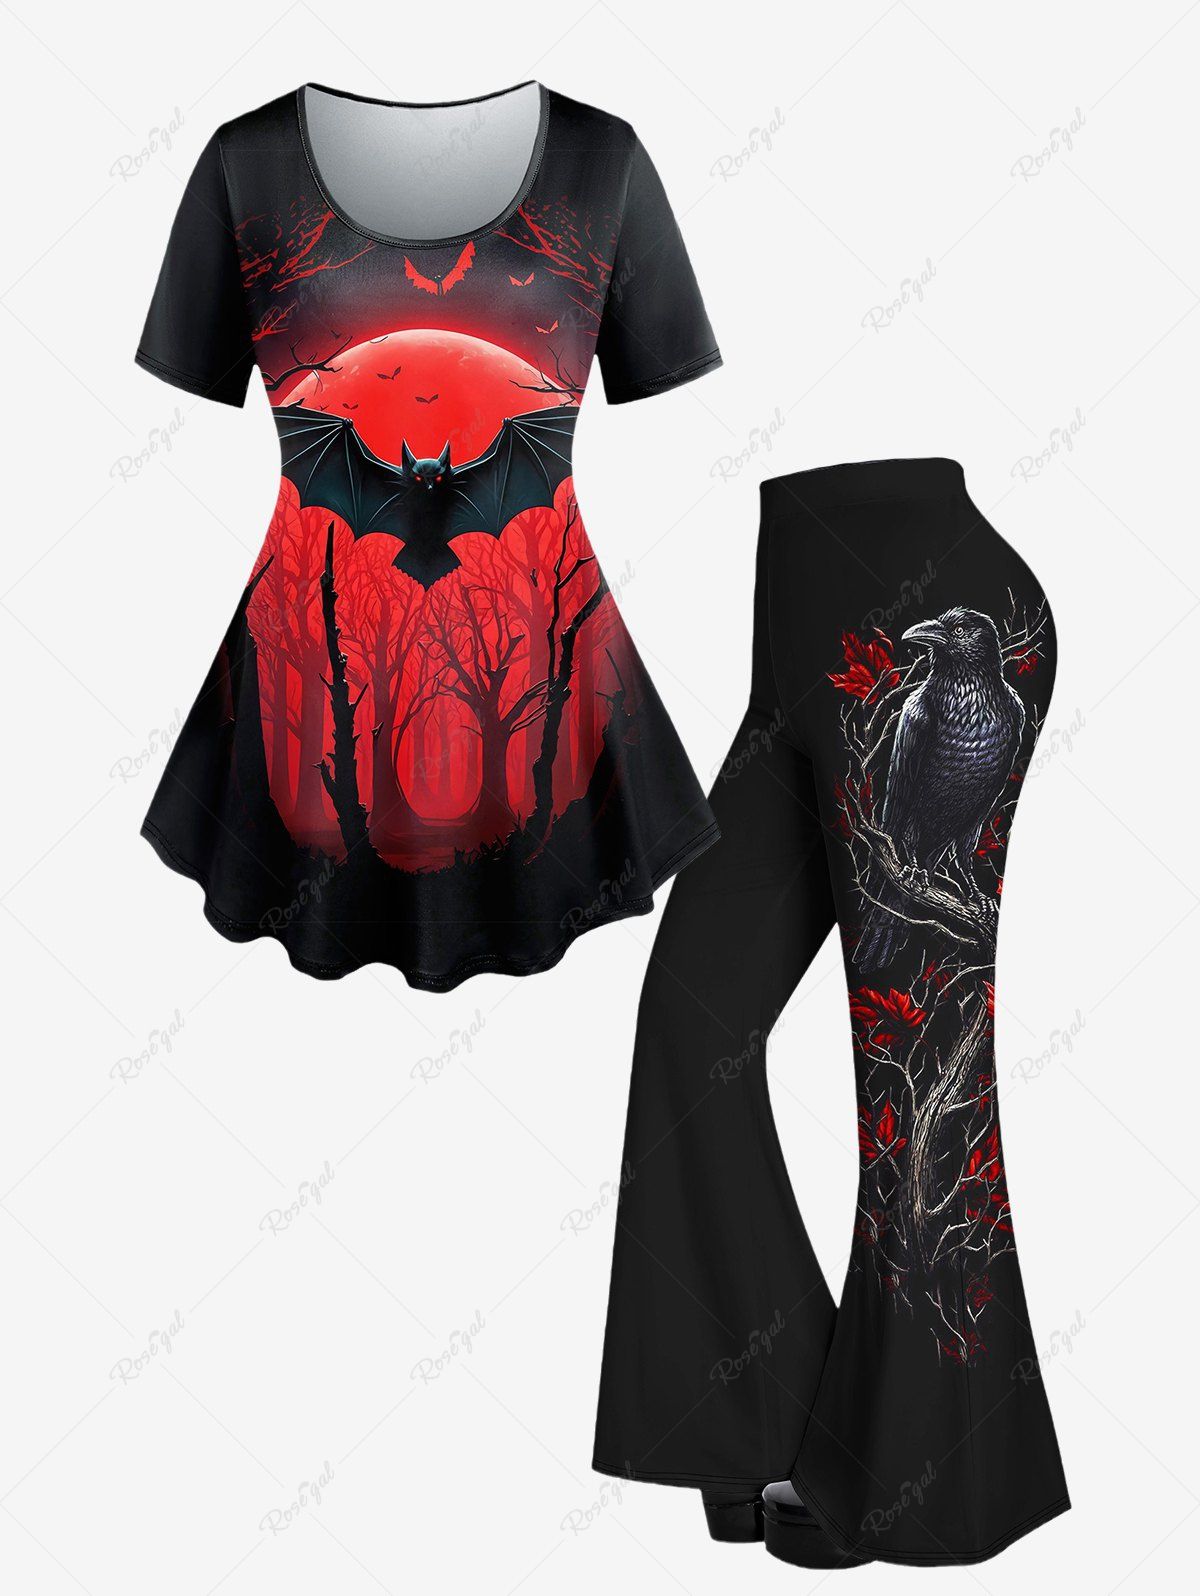 Store Gothic Tree Bat Sunset Printed Short Sleeve T-shirt and Leaves Bird Printed Flare Pants Outfit  